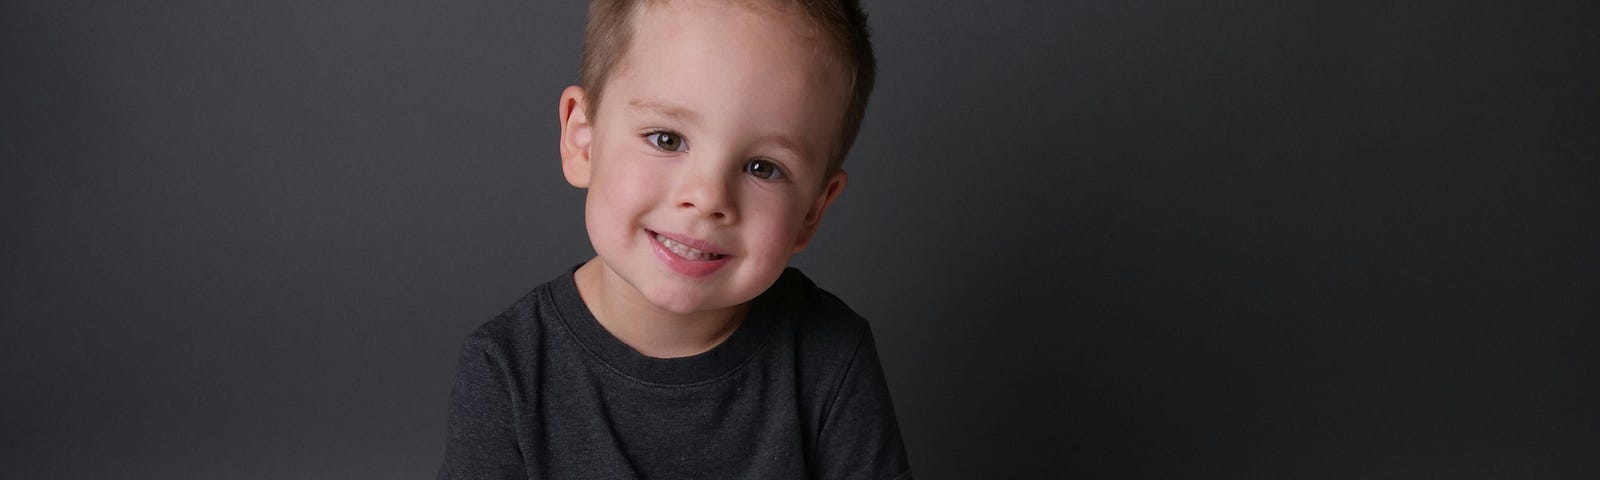 Photo of small boy looking at the camera with an angelic smile on his face.